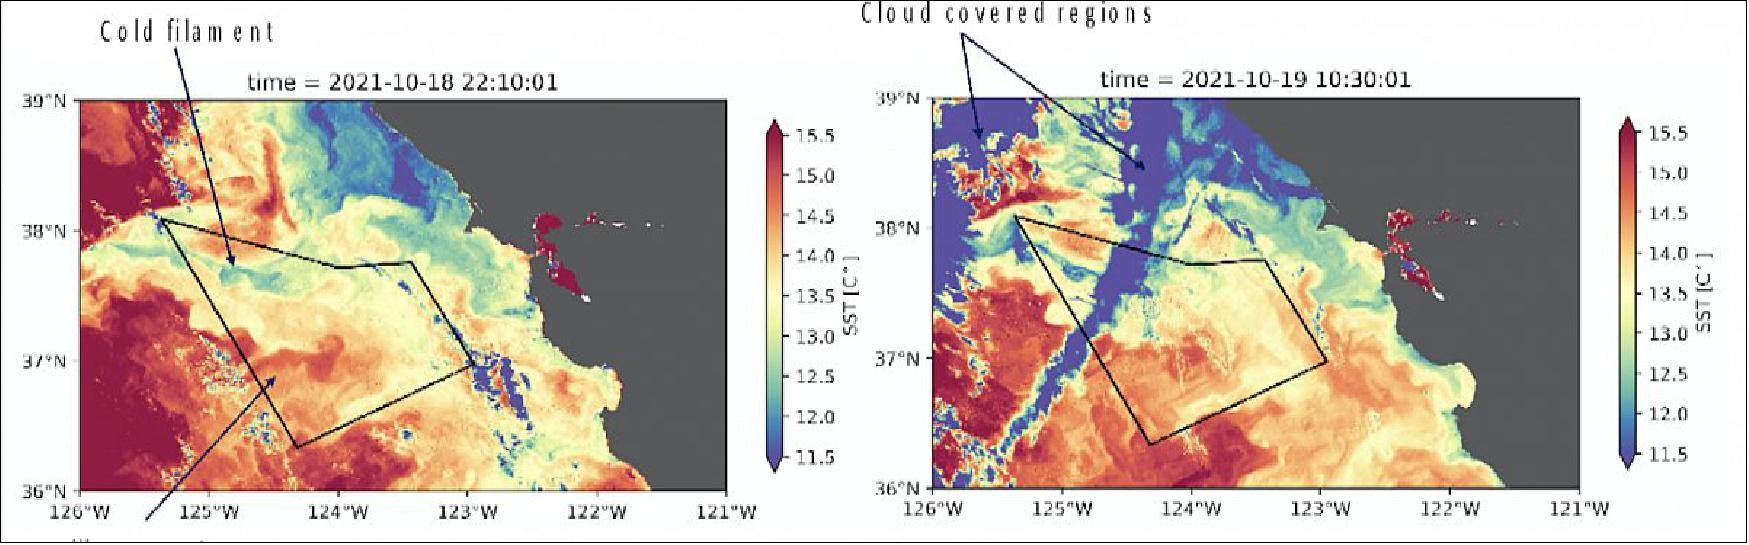 Figure 6: Sea surface temperature images from the Visible Infrared Imaging Radiometer Suite (VIIRS) instrument on S/C show a warm water intrusion propagating into the S-MODE area (black polygon) from the western boundary and a cold water filament propagating into the S-MODE area from the northwestern boundary. Left image obtained on October 18th 2021, right image corresponding to October 19th 2021 (image credit: NASA)